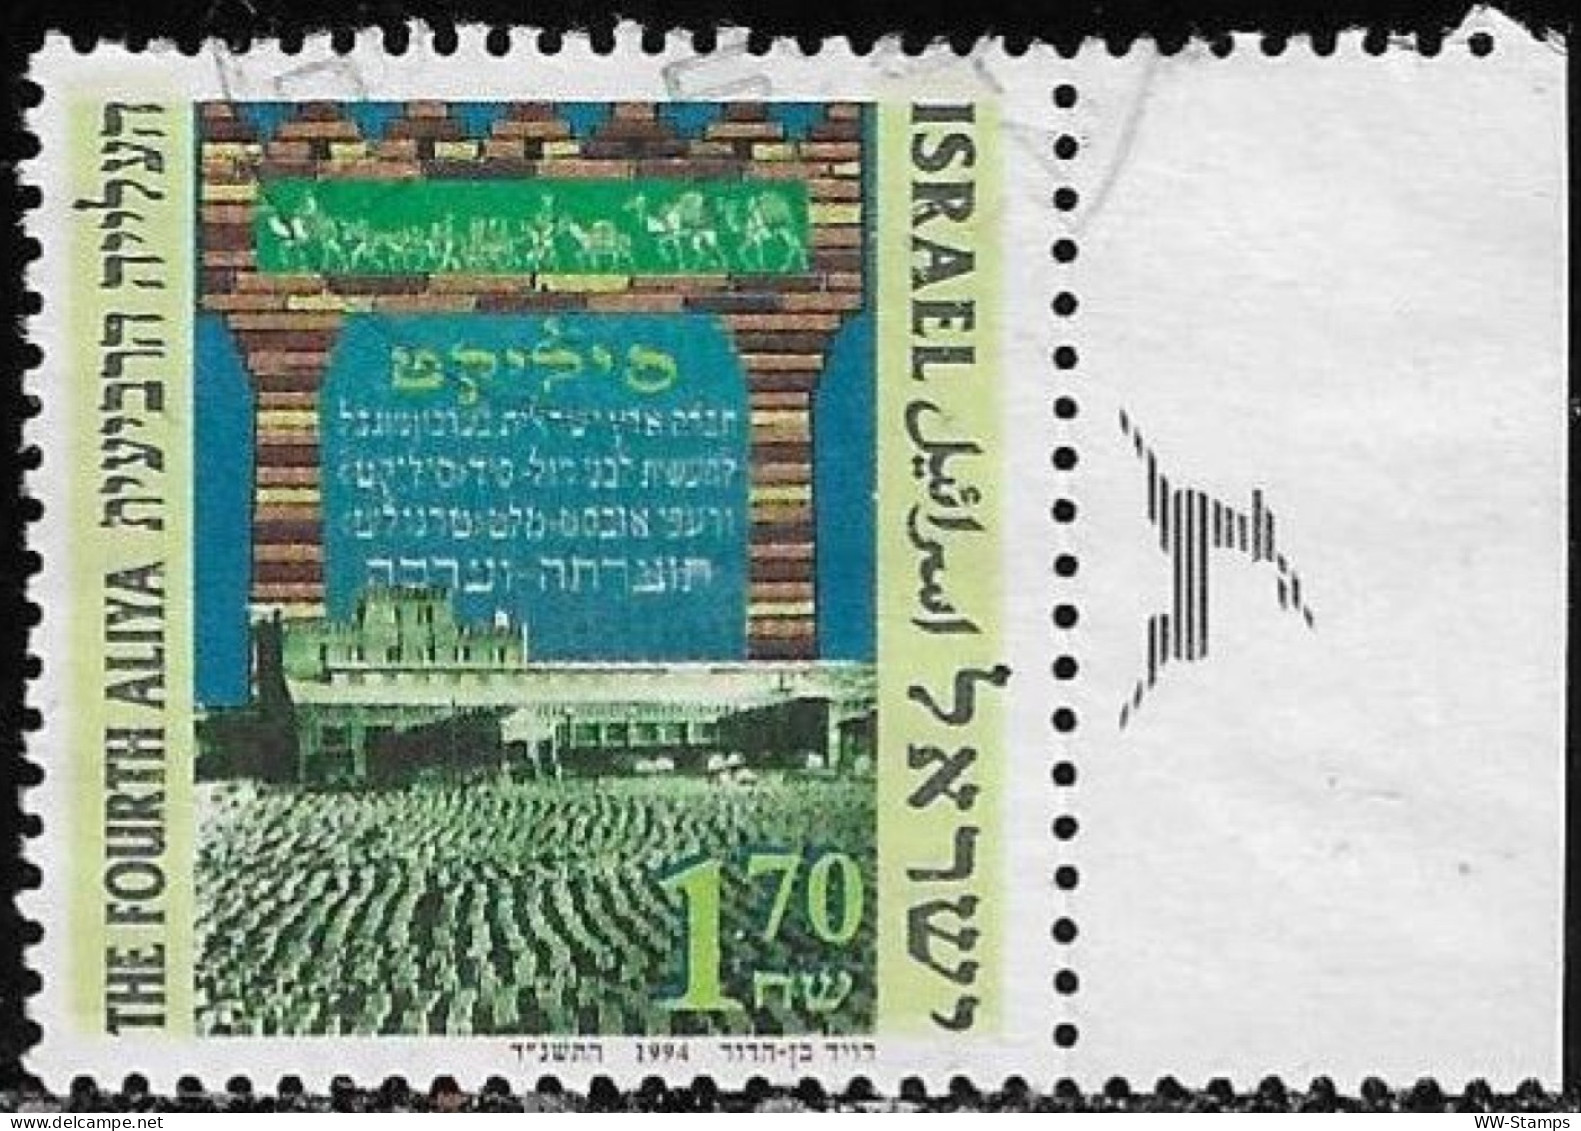 Israel 1994 Used Stamp The Fourth Aliya Immigration Of Jews To Israel [INLT46] - Used Stamps (without Tabs)